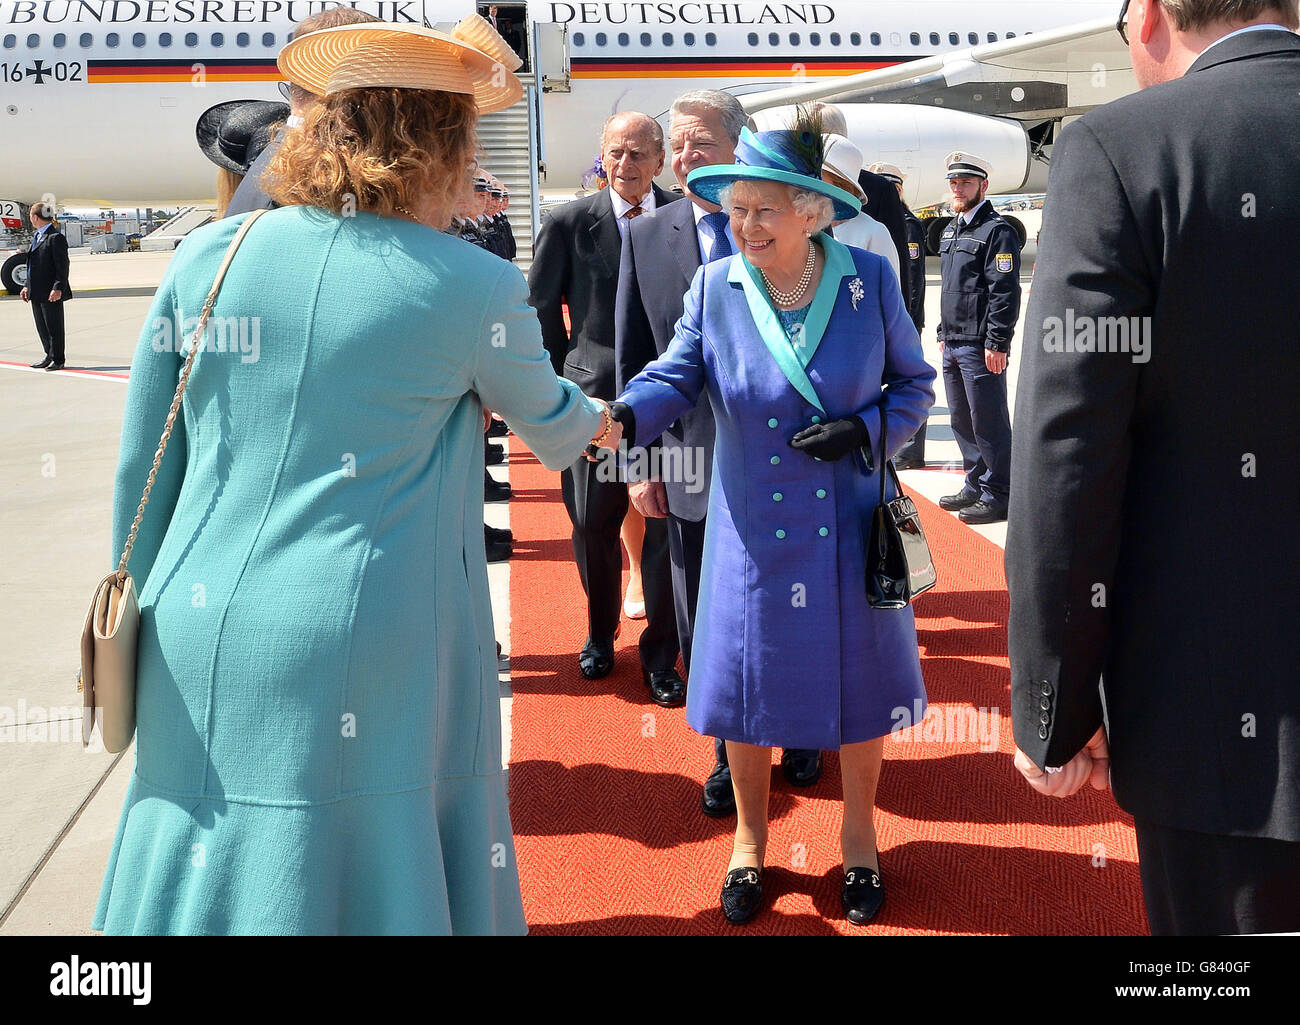 Queen Elizabeth II, the Duke of Edinburgh and German President Joachim Gauck arrive at Frankfurt am Main International Airport, on the second day of a four day State visit by the Queen, to Germany. Stock Photo